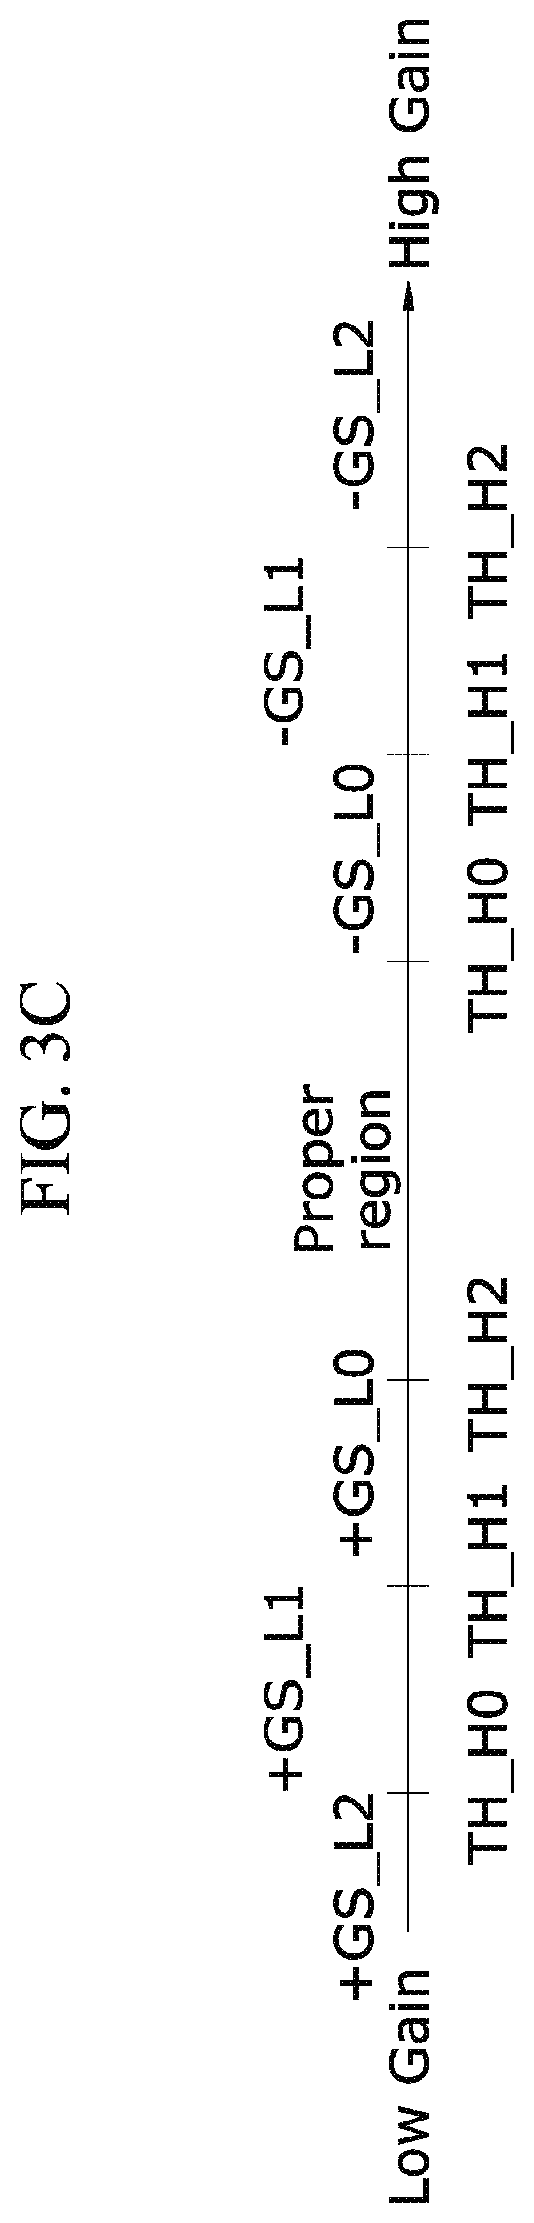 Heart pacemaker and energy harvesting method thereof